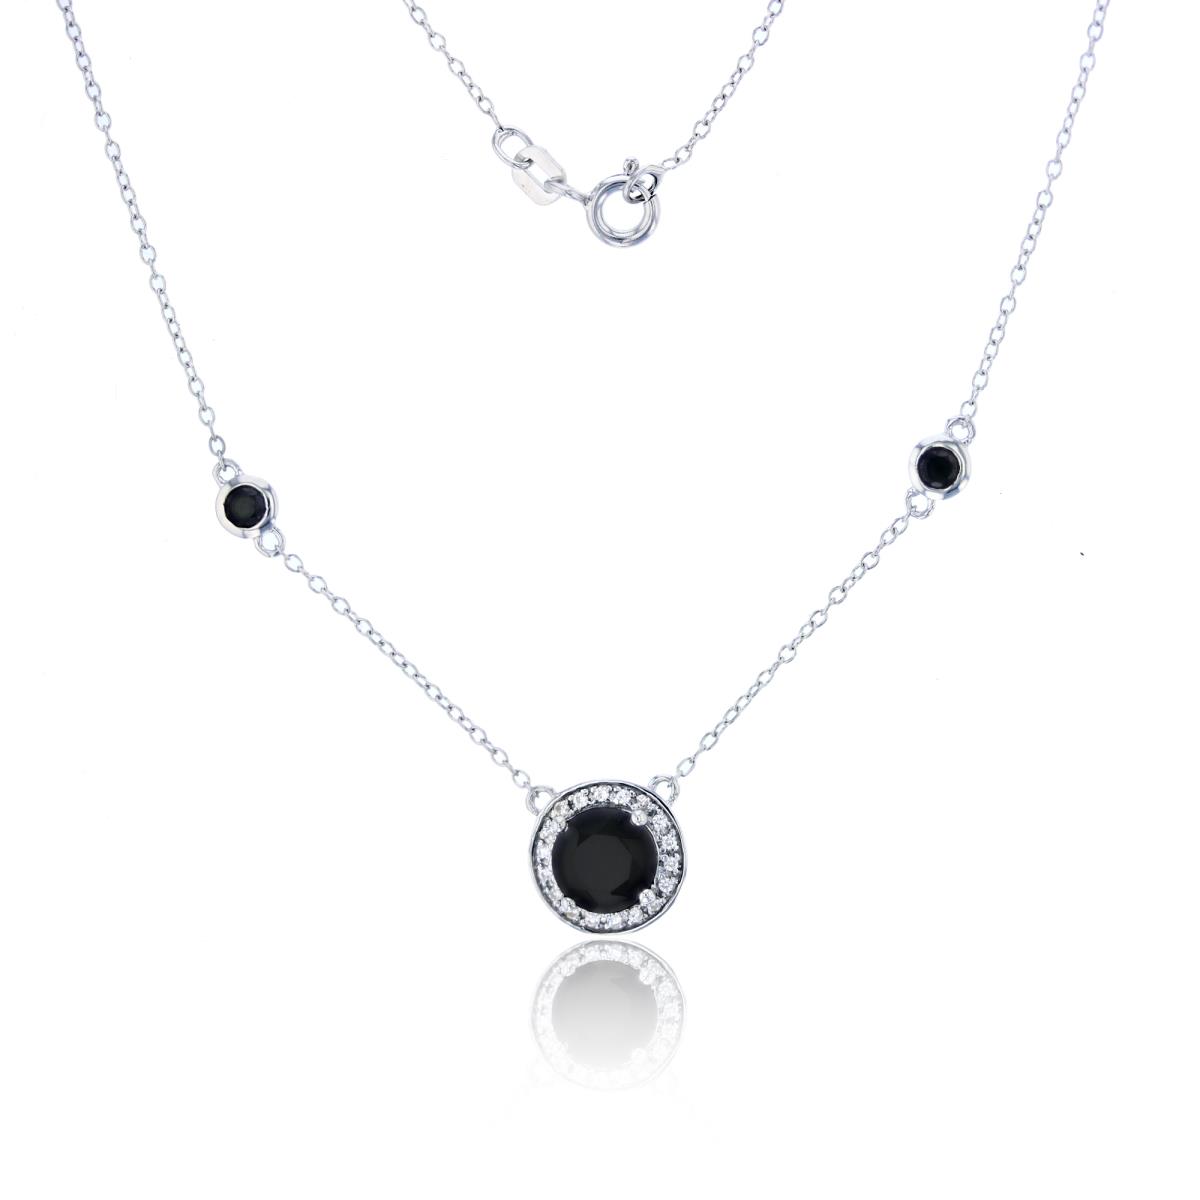 Sterling Silver Rhodium 7mm/3mm Onyx & Cr. White Sapphire Station Necklace